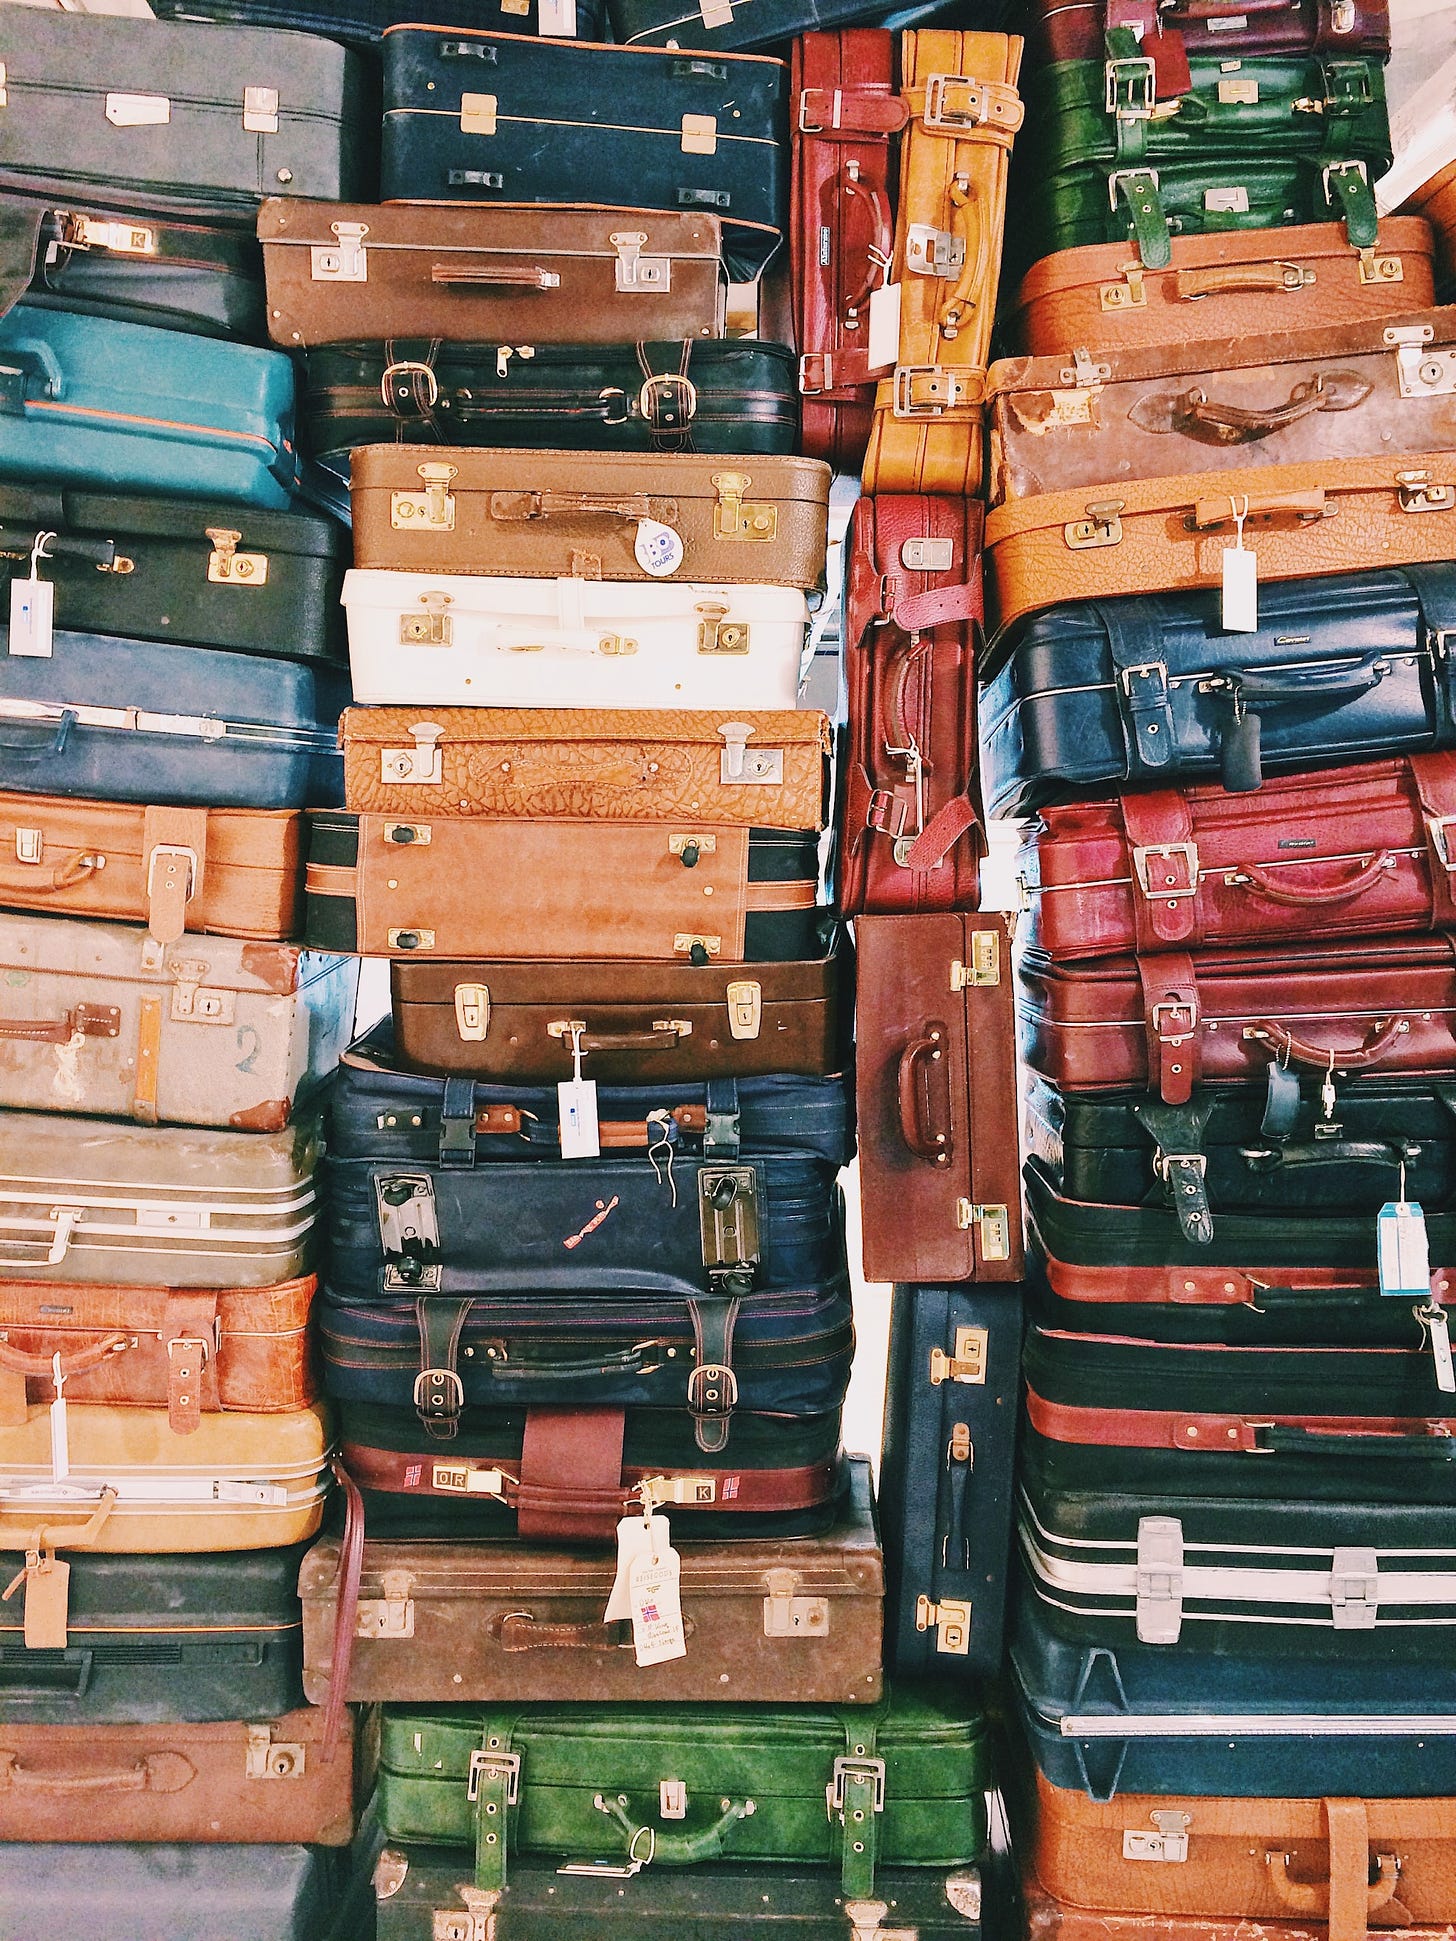 A stack of suitcases piled high, creating a tower of travel essentials